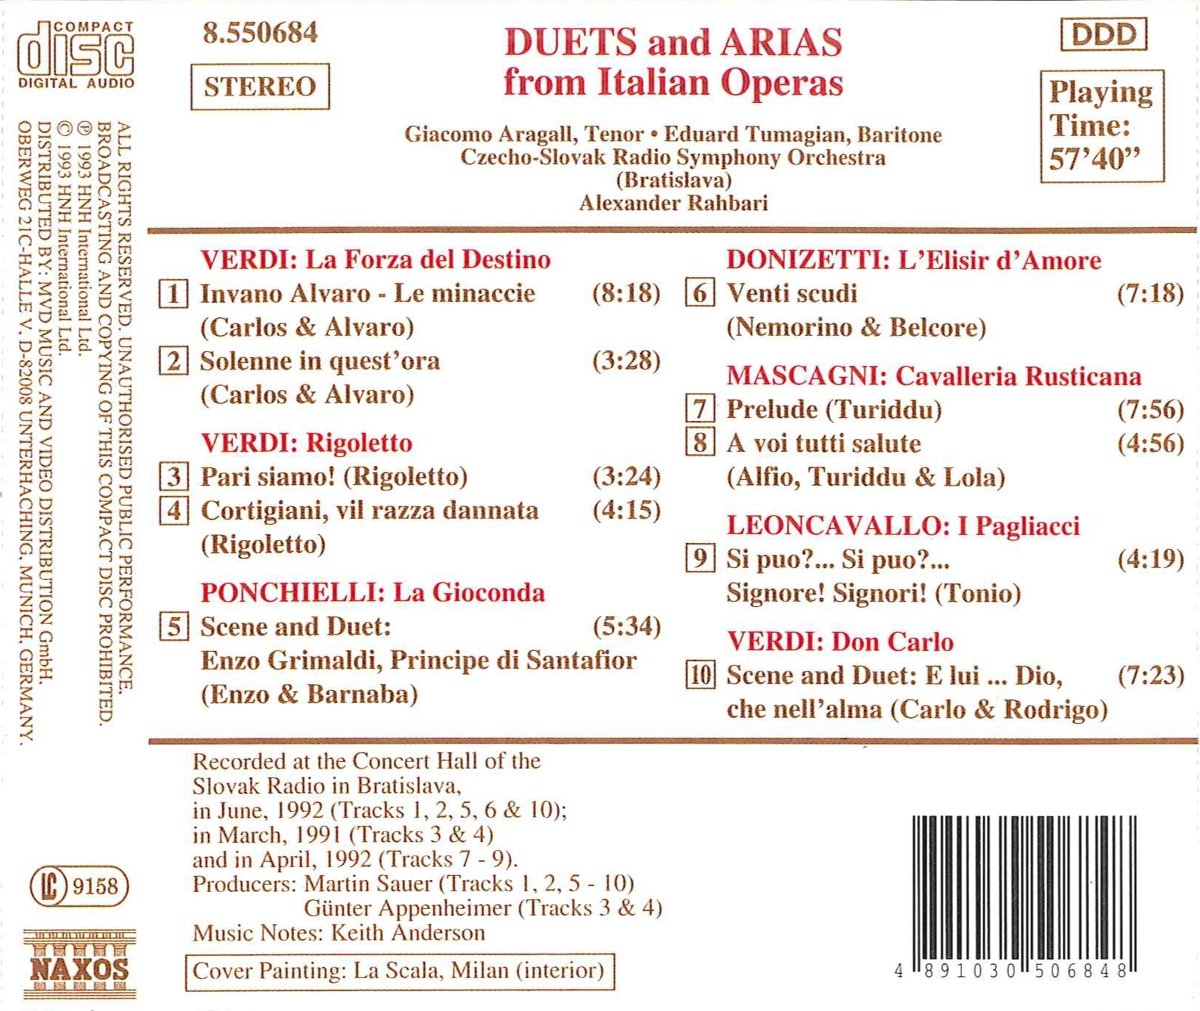 Duets and Arias from Italian Operas - slide-1